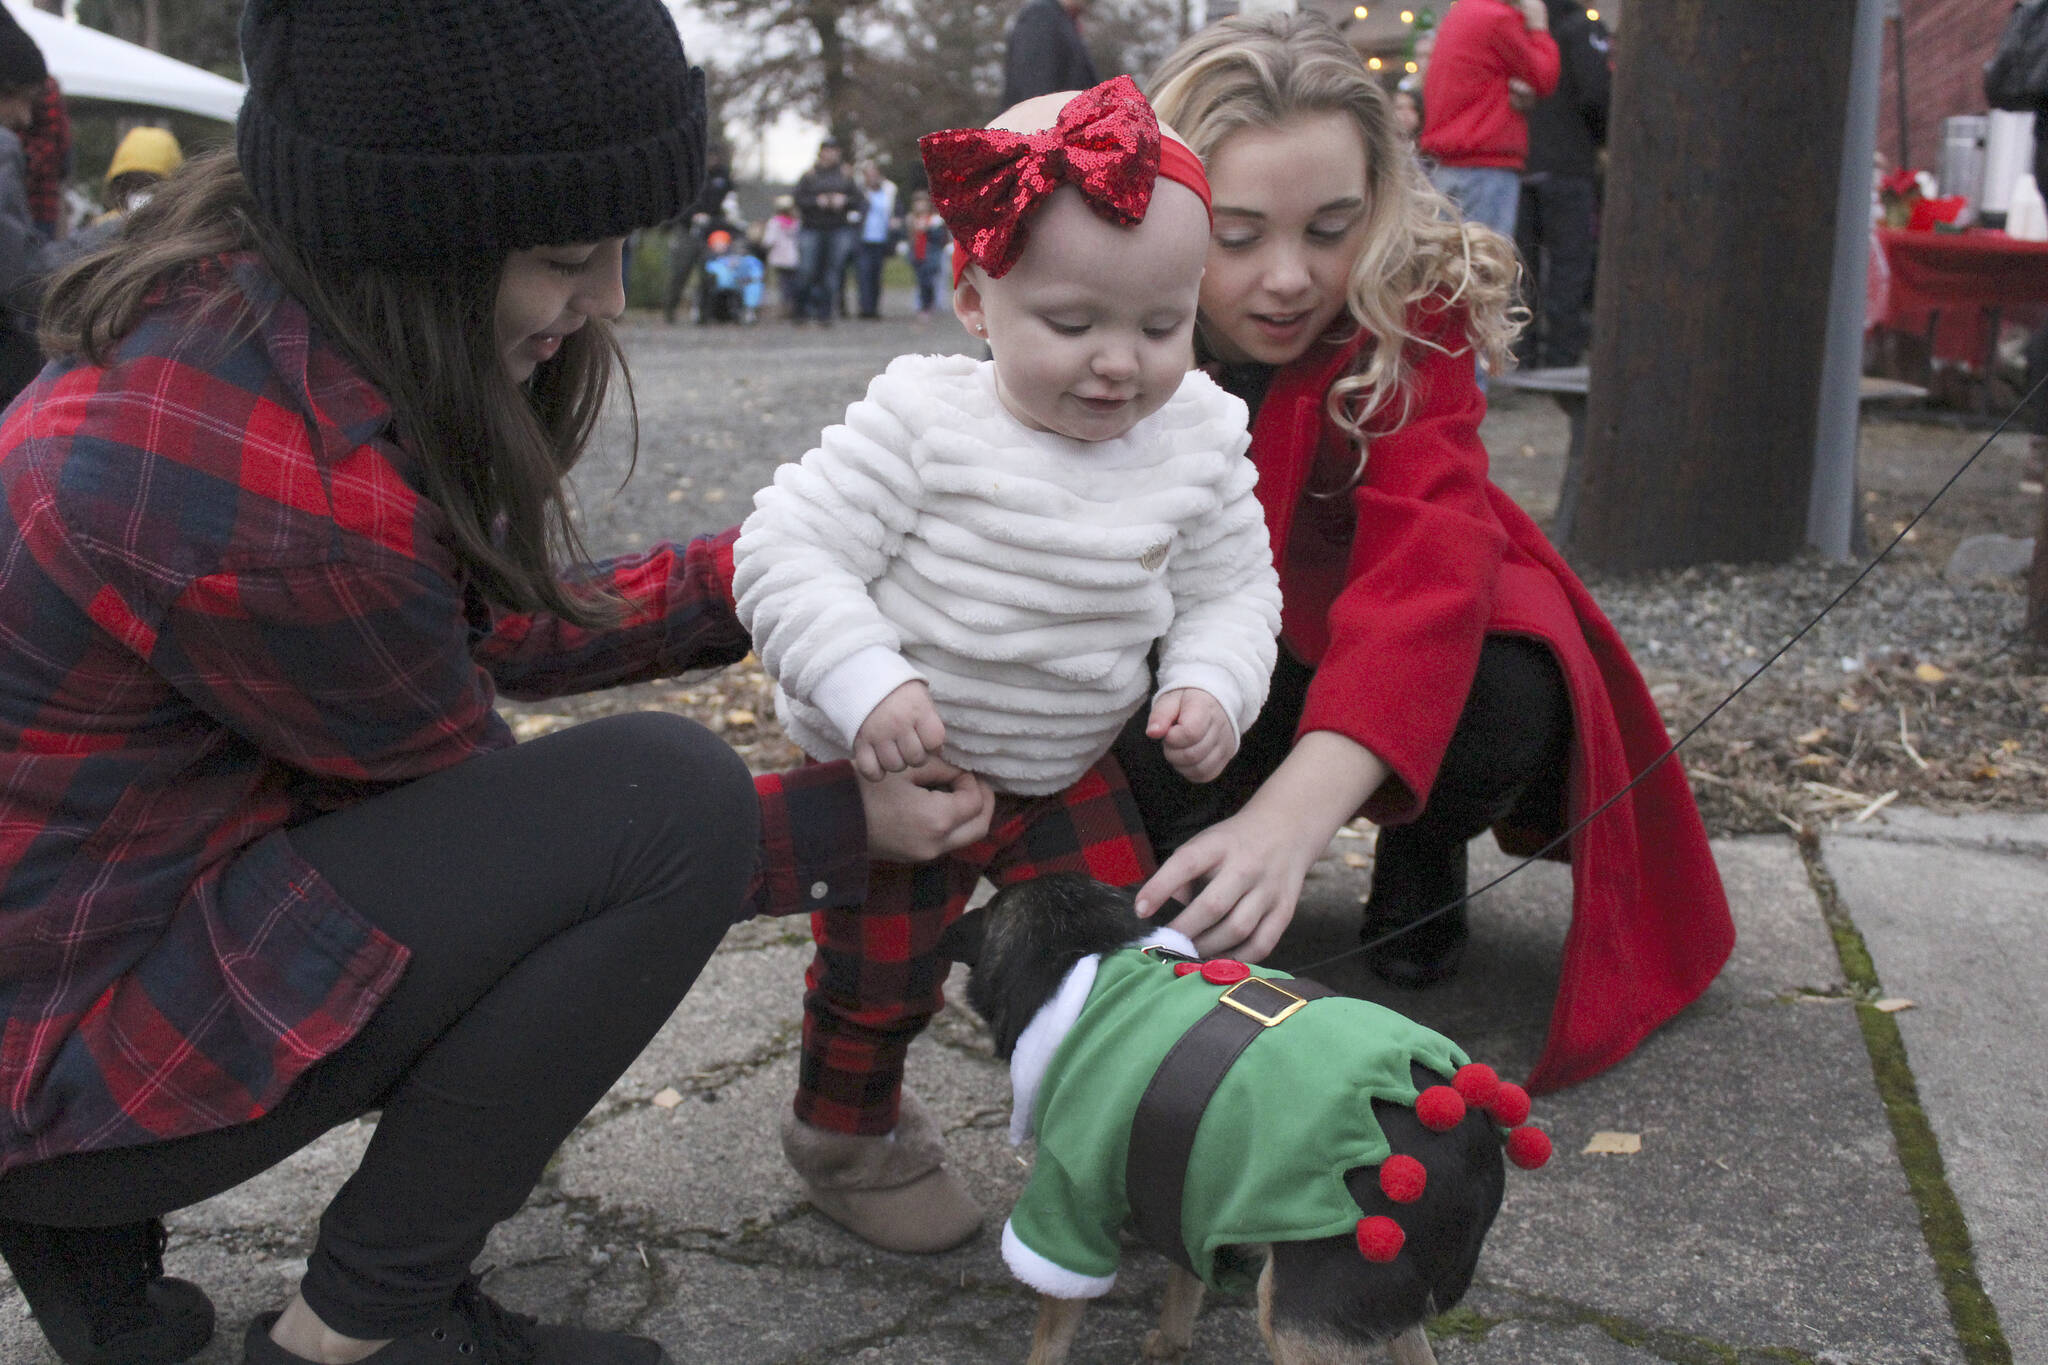 Marley Brown, 1, meets with Lulu in this file photo from Buckley’s 2018 tree lighting.